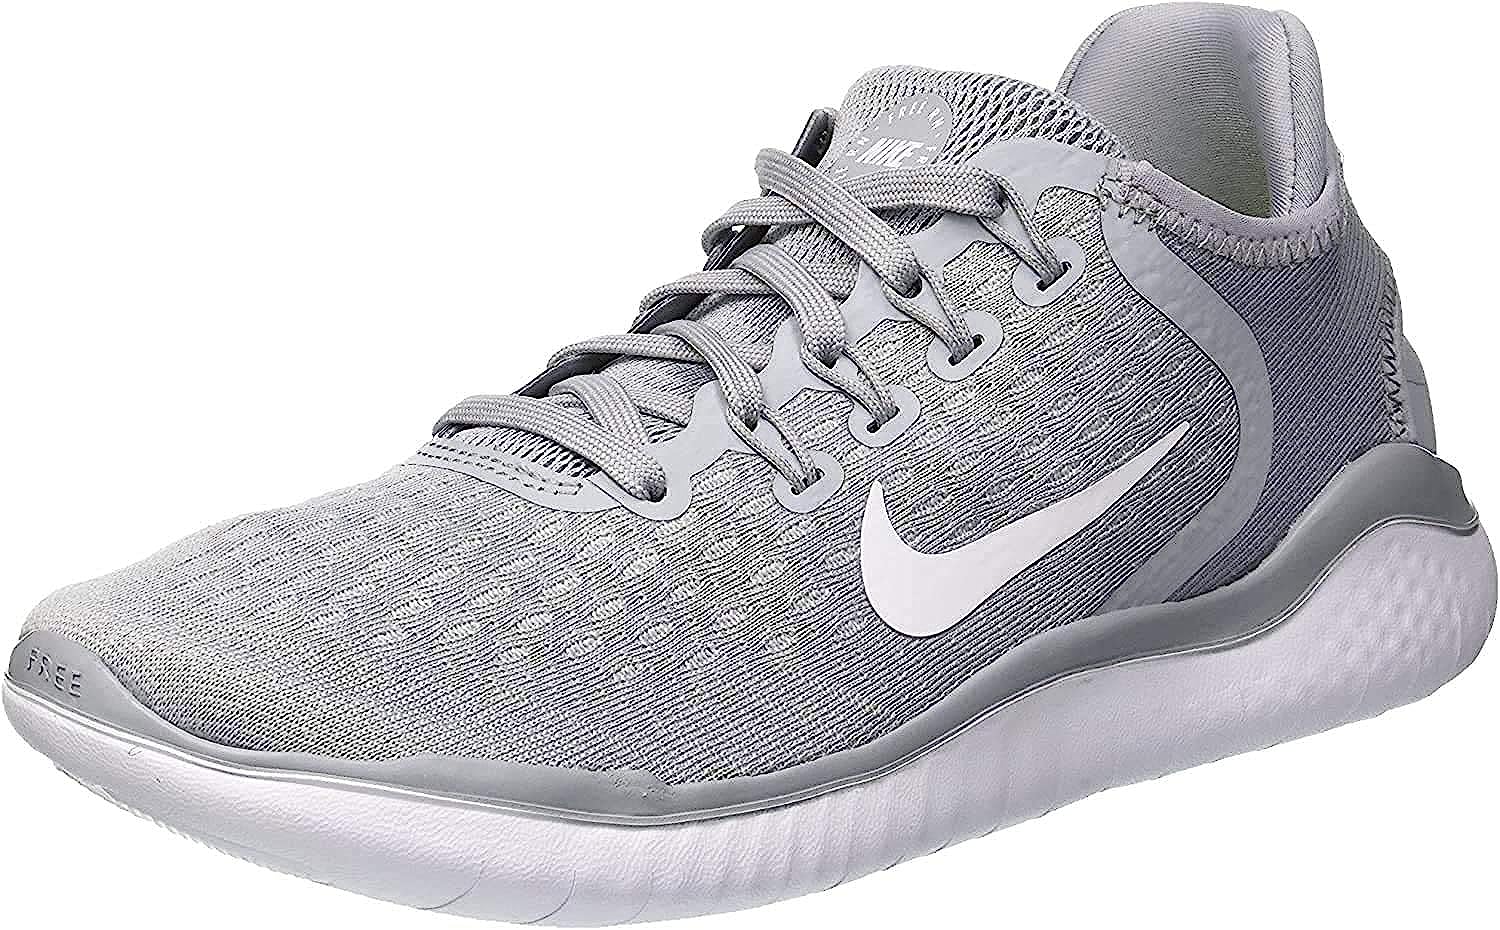 nike running shoes for flat feet detailed review